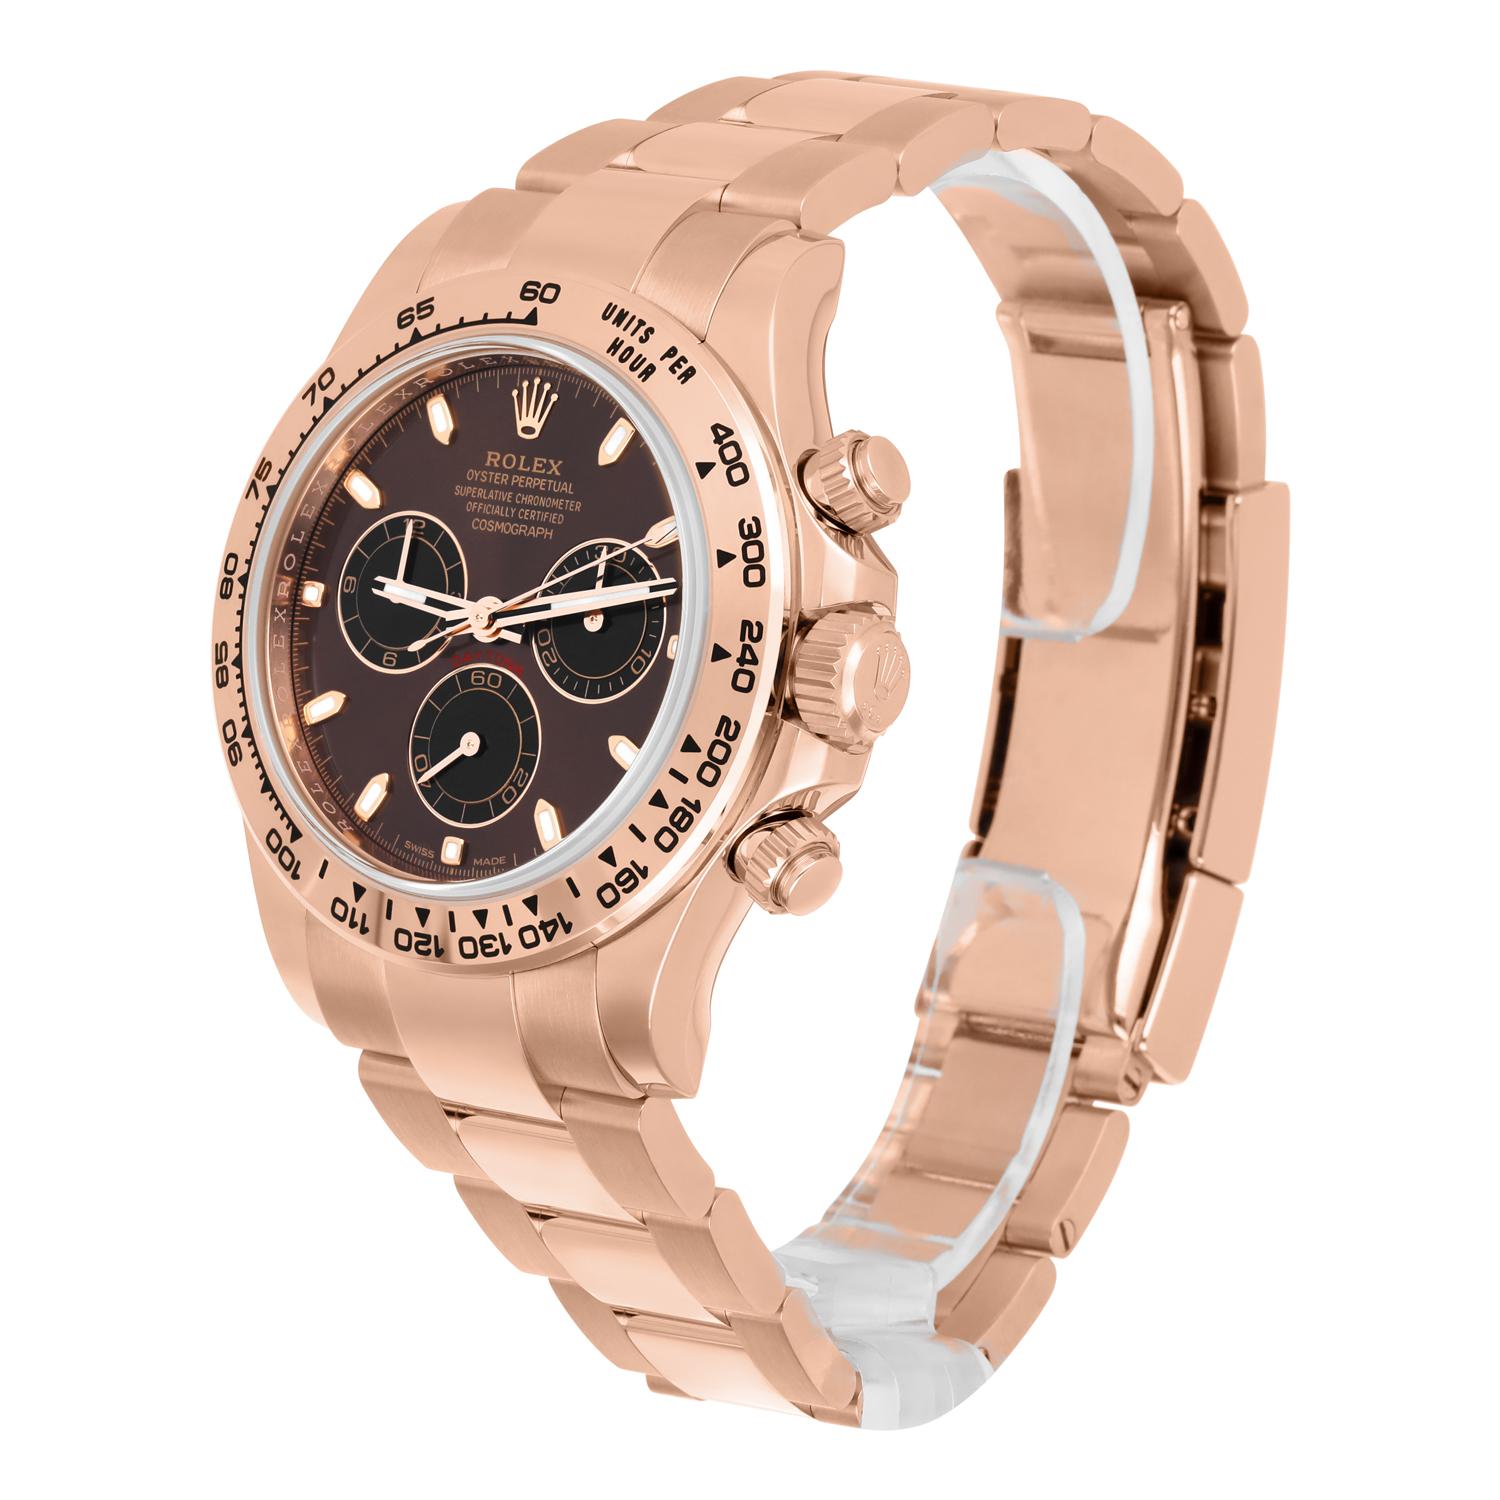 Rolex Cosmograph Daytona 116505 18K Rose Gold Watch Chocolate Dial UNWORN 2022 In New Condition For Sale In New York, NY